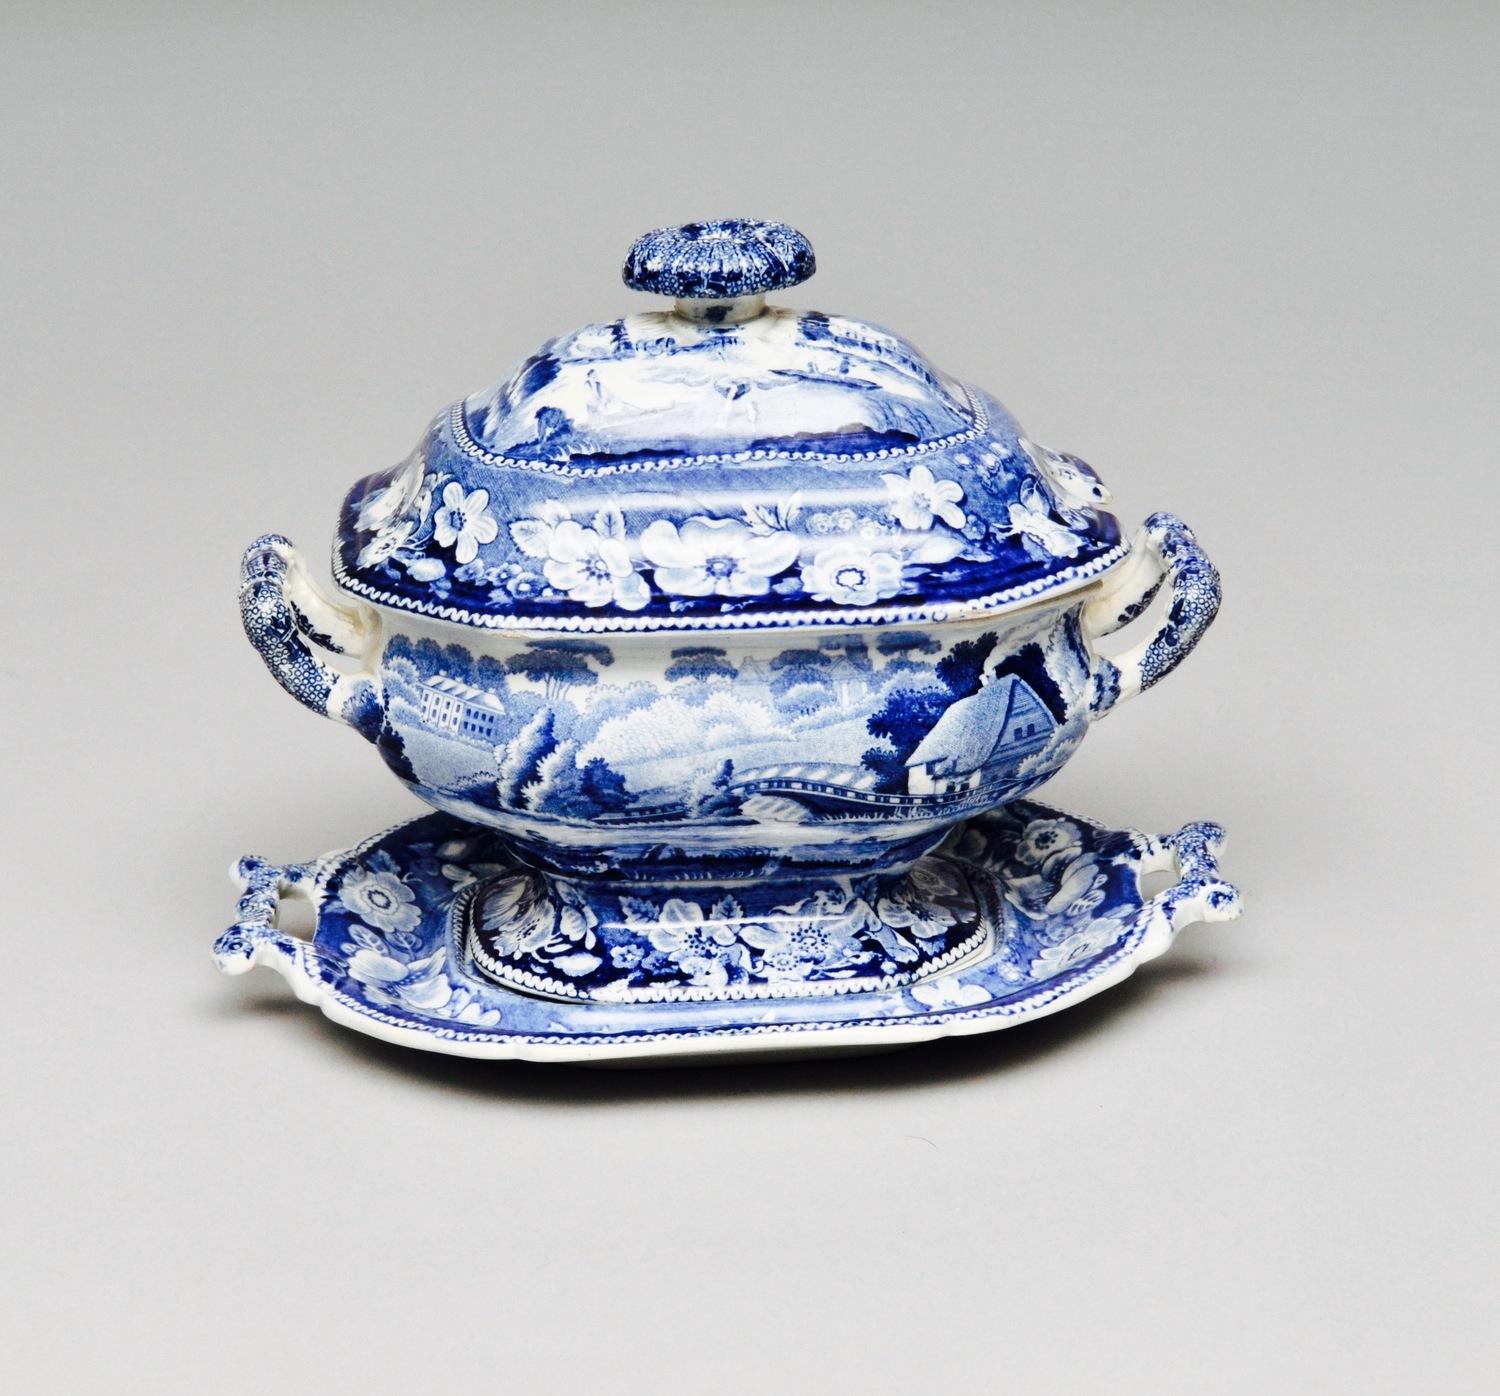 A blue and white antique tureen on its stand with lid.

Measures: H 16cm, W 15cm

A beautiful traditional blue and white porcelain tureen with lid and stand, in excellent condition.